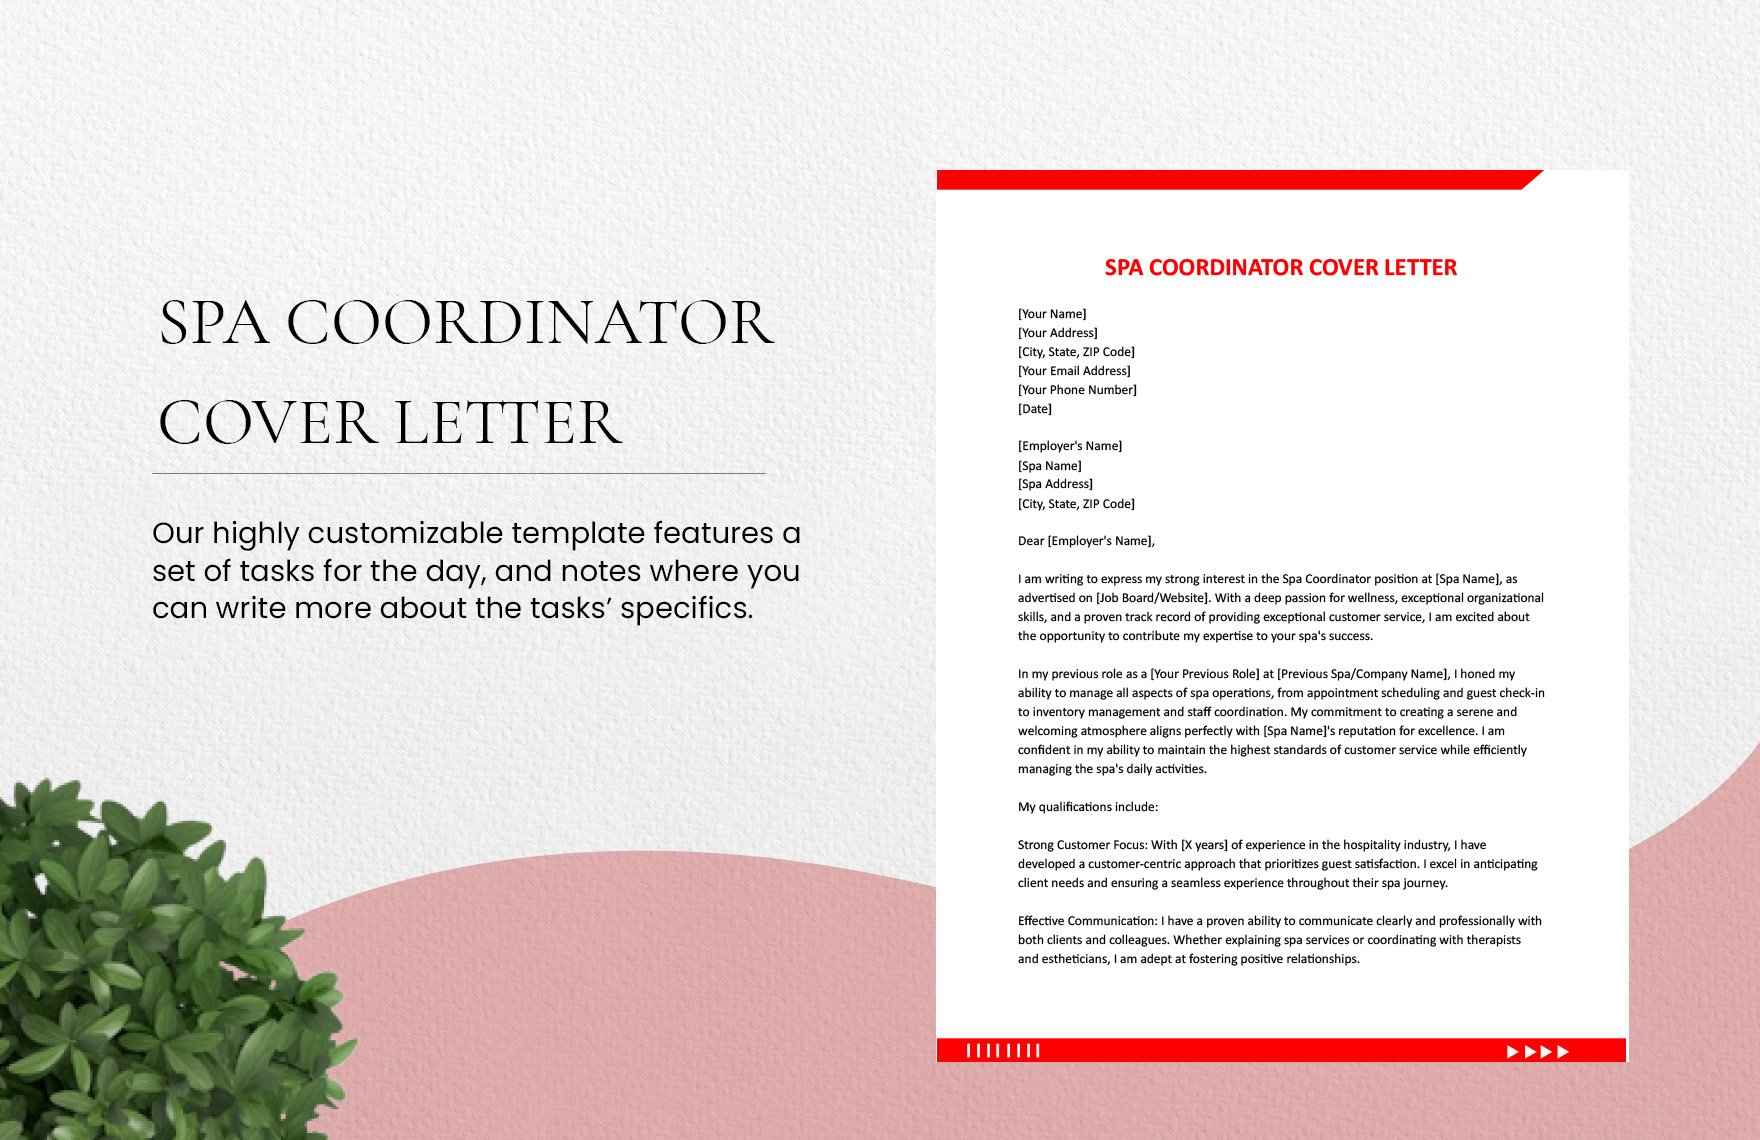 Spa Coordinator Cover Letter in Word, Google Docs